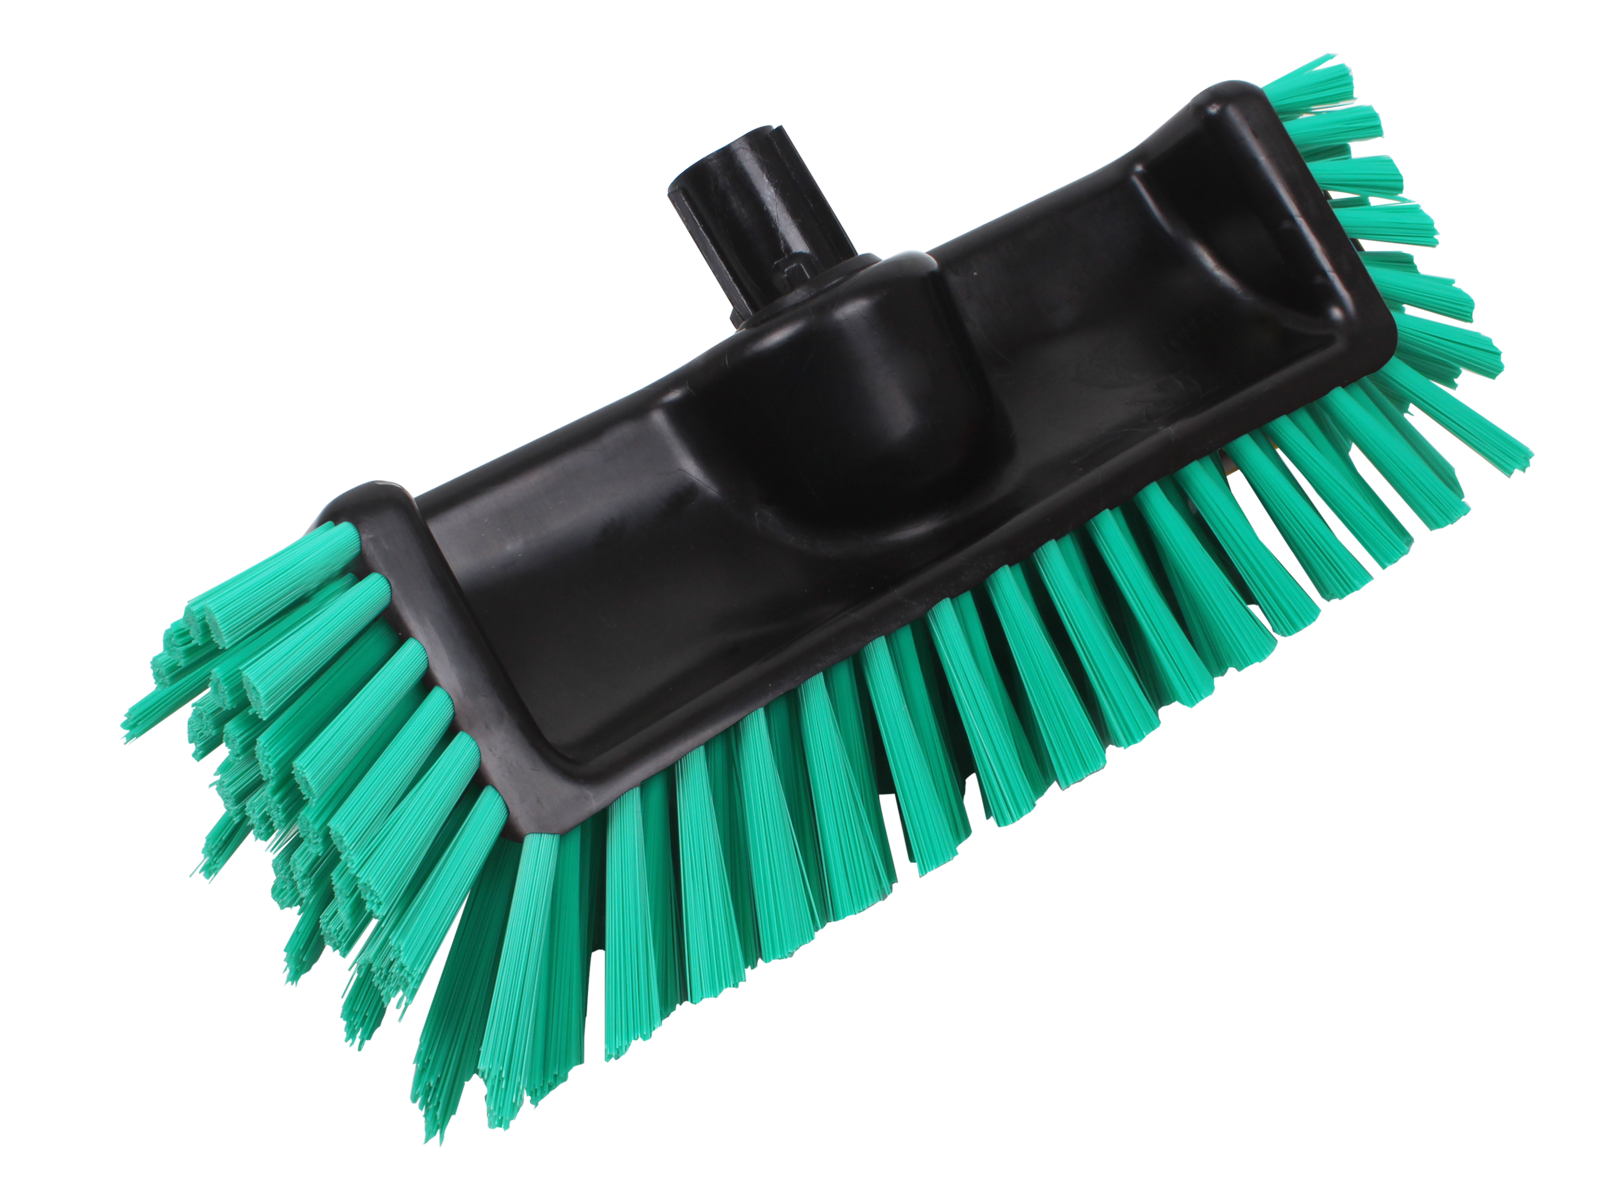 Carpet cleaning scrubbing Brush - Scatter broom green